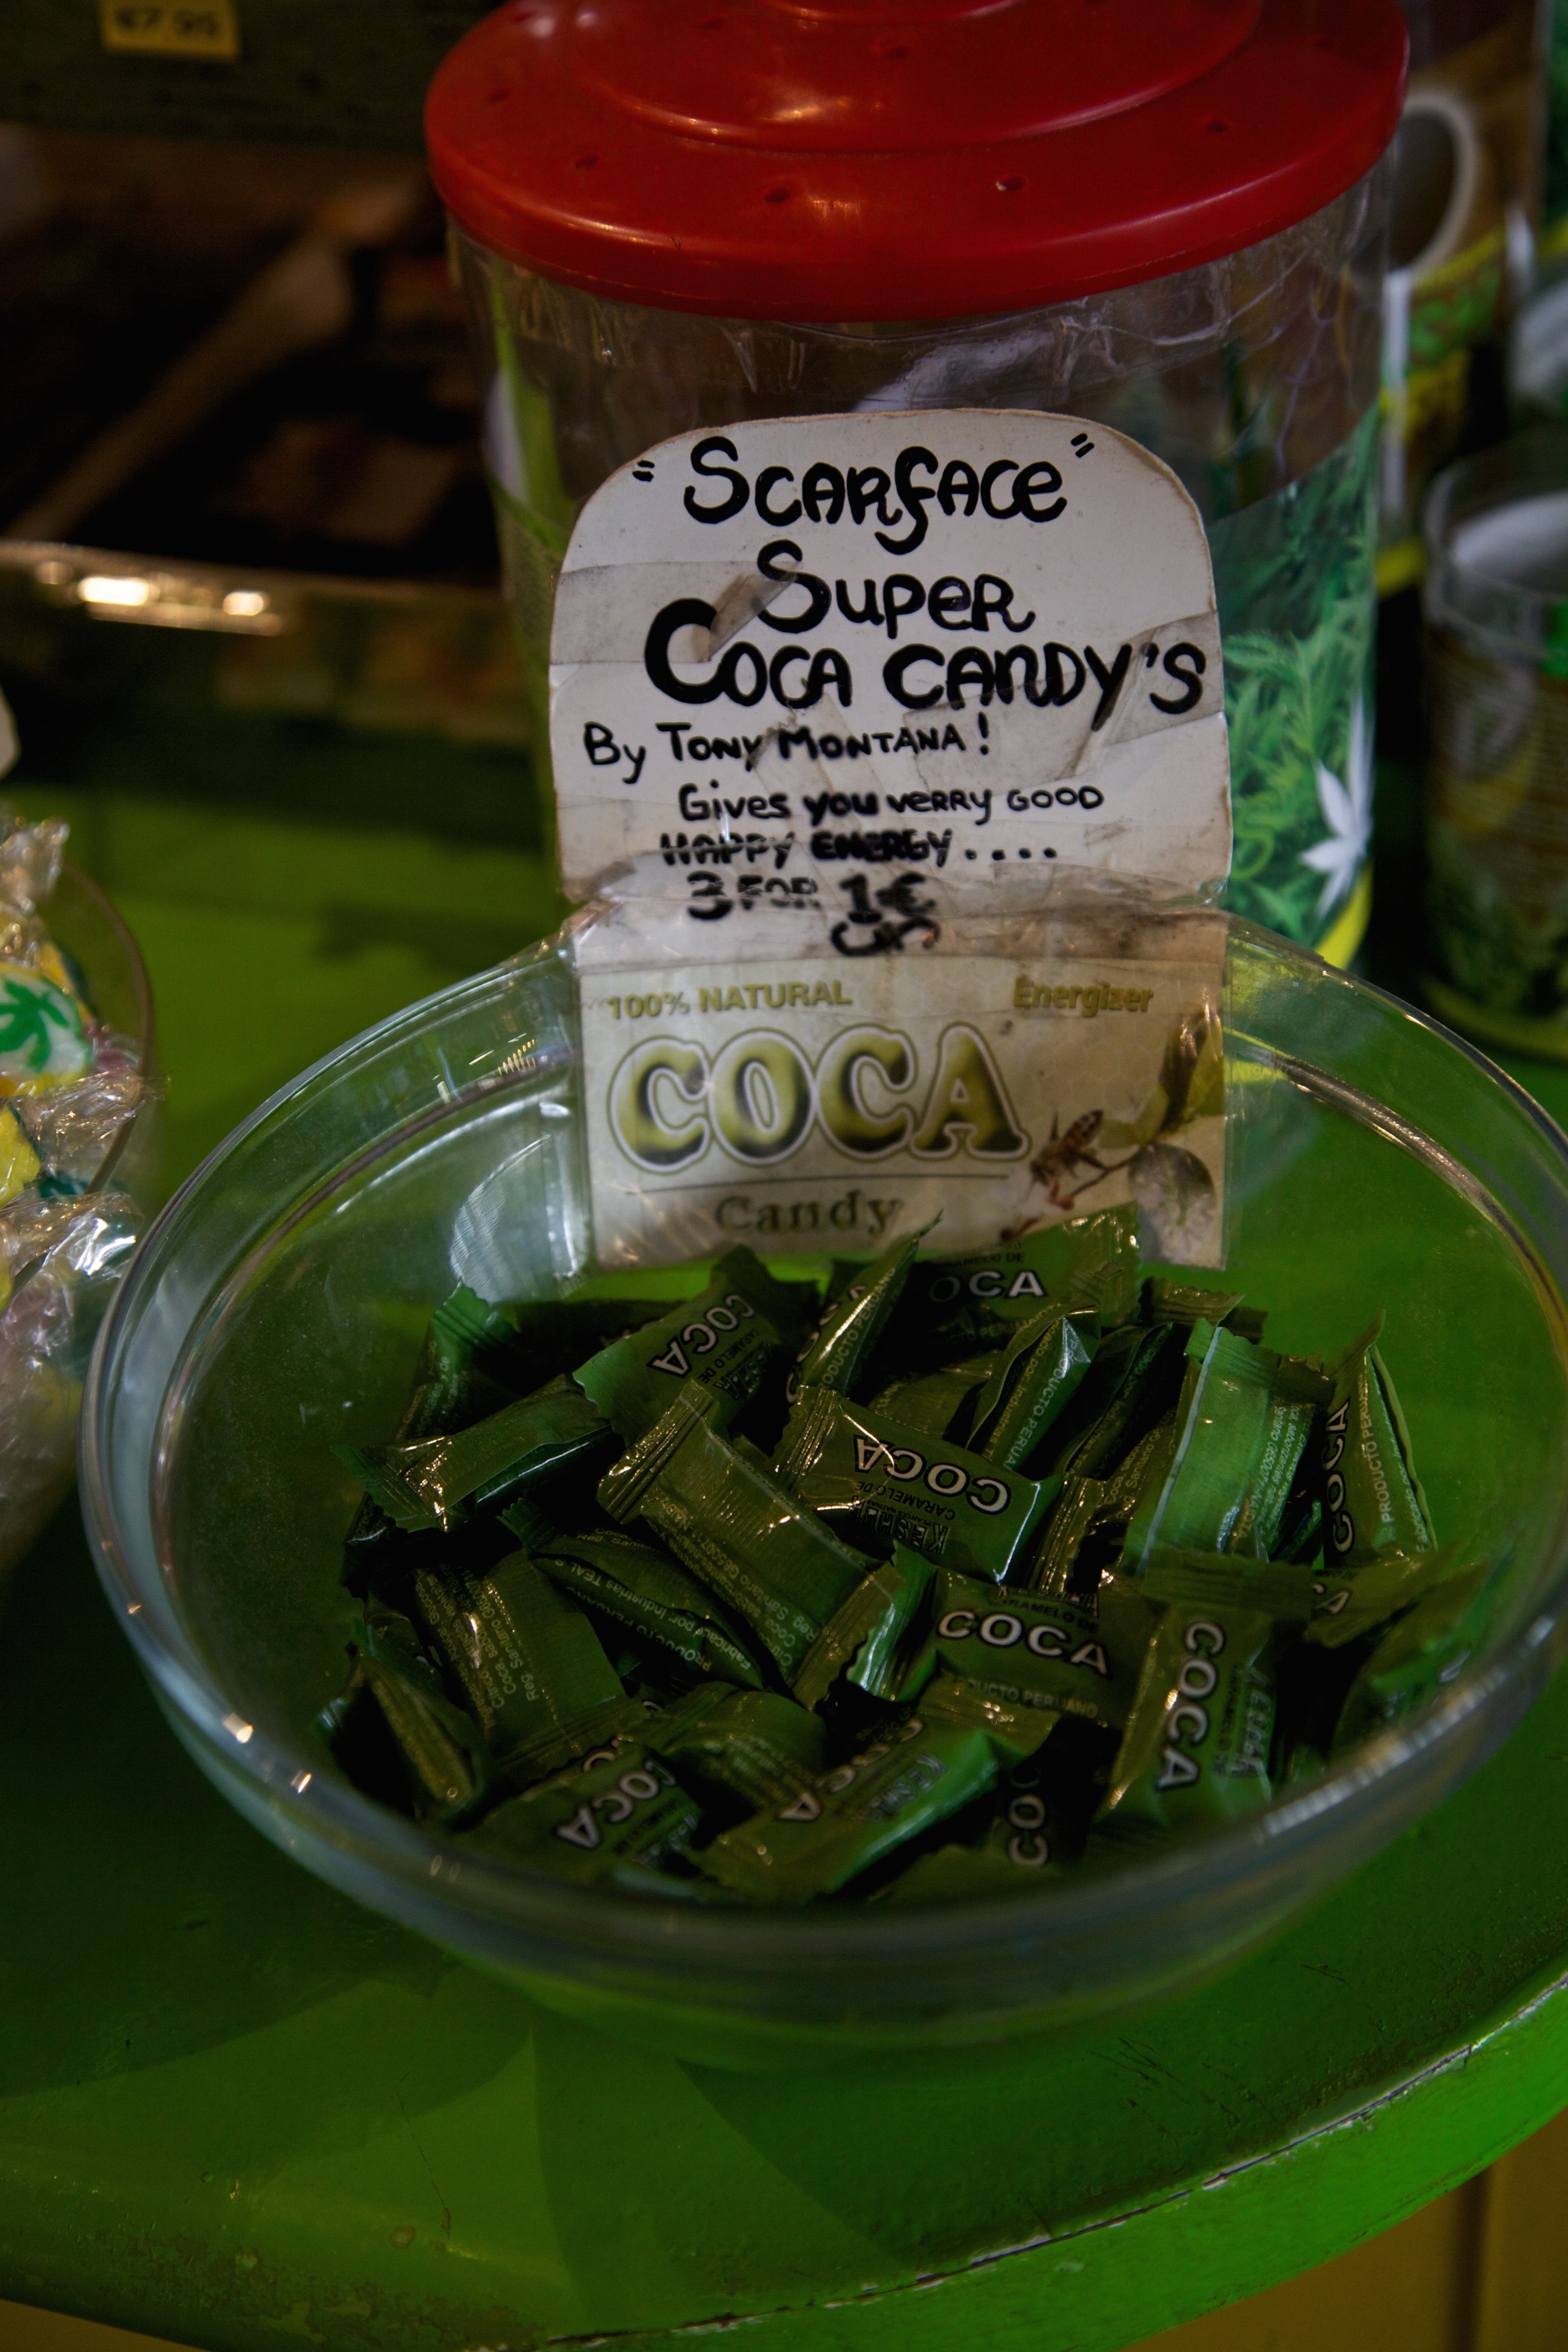 Coca Candy on offer in Amsterdam, Holland.